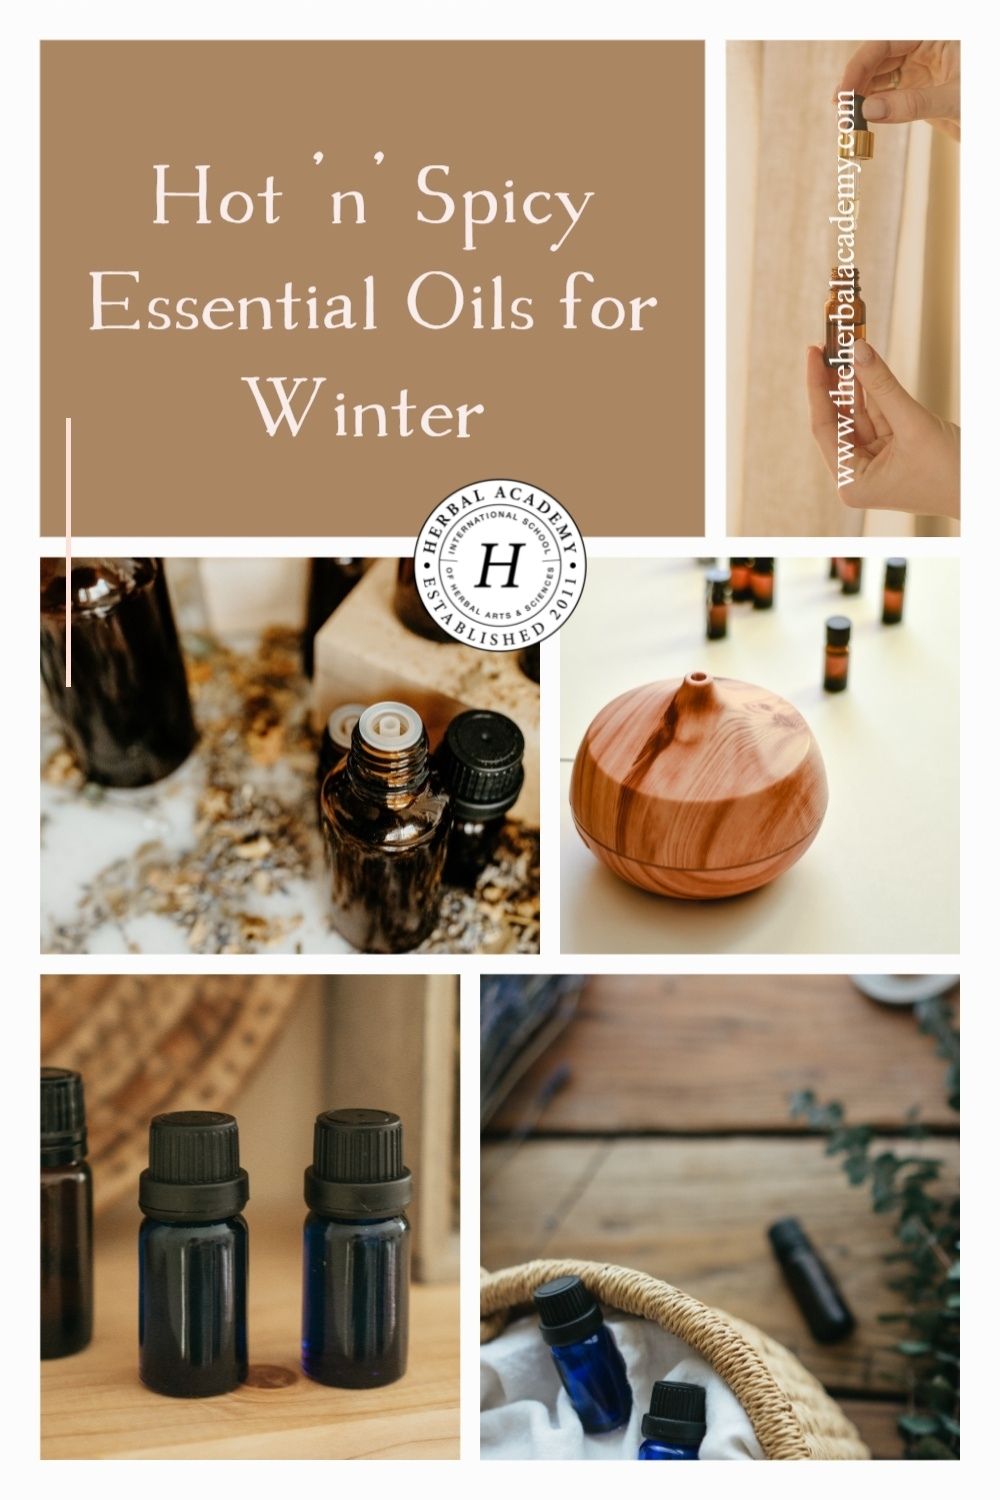 Hot ‘n’ Spicy Essential Oils for Winter | Herbal Academy | This time of year is perfect for creating essential oils for winter blends to ease upper respiratory disease symptoms.